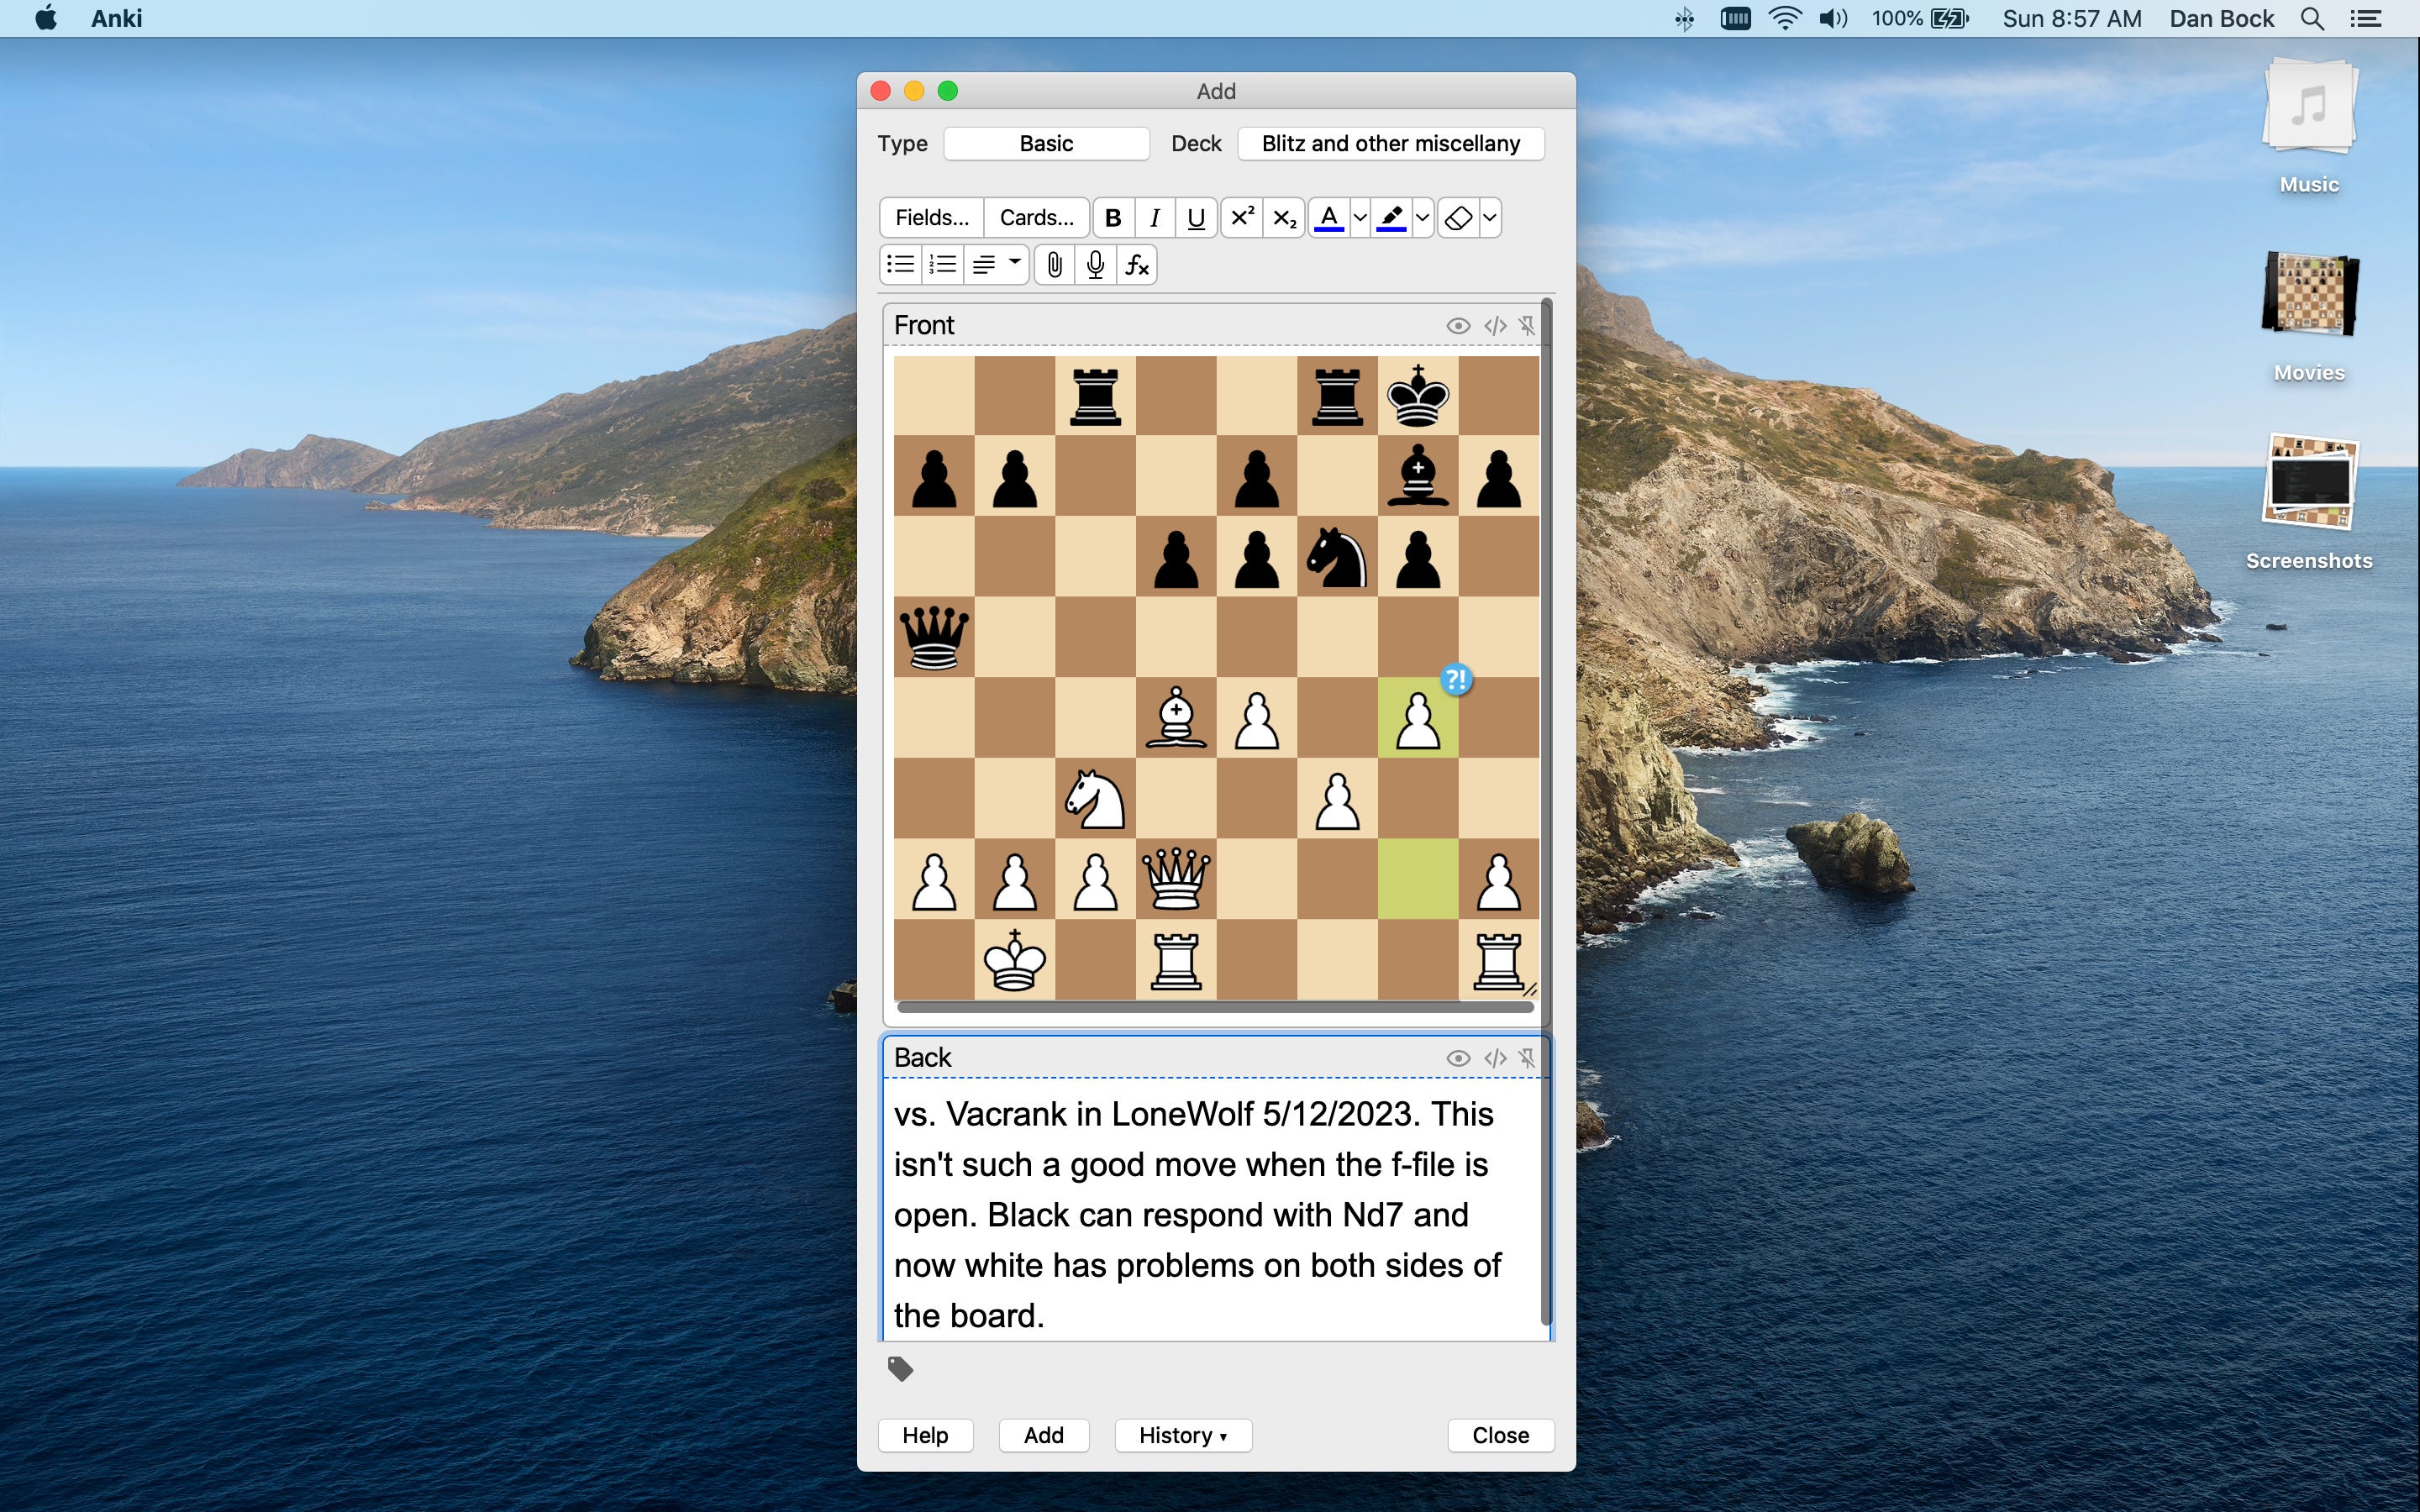 How To Remember Your Chess Openings - With Chessable 